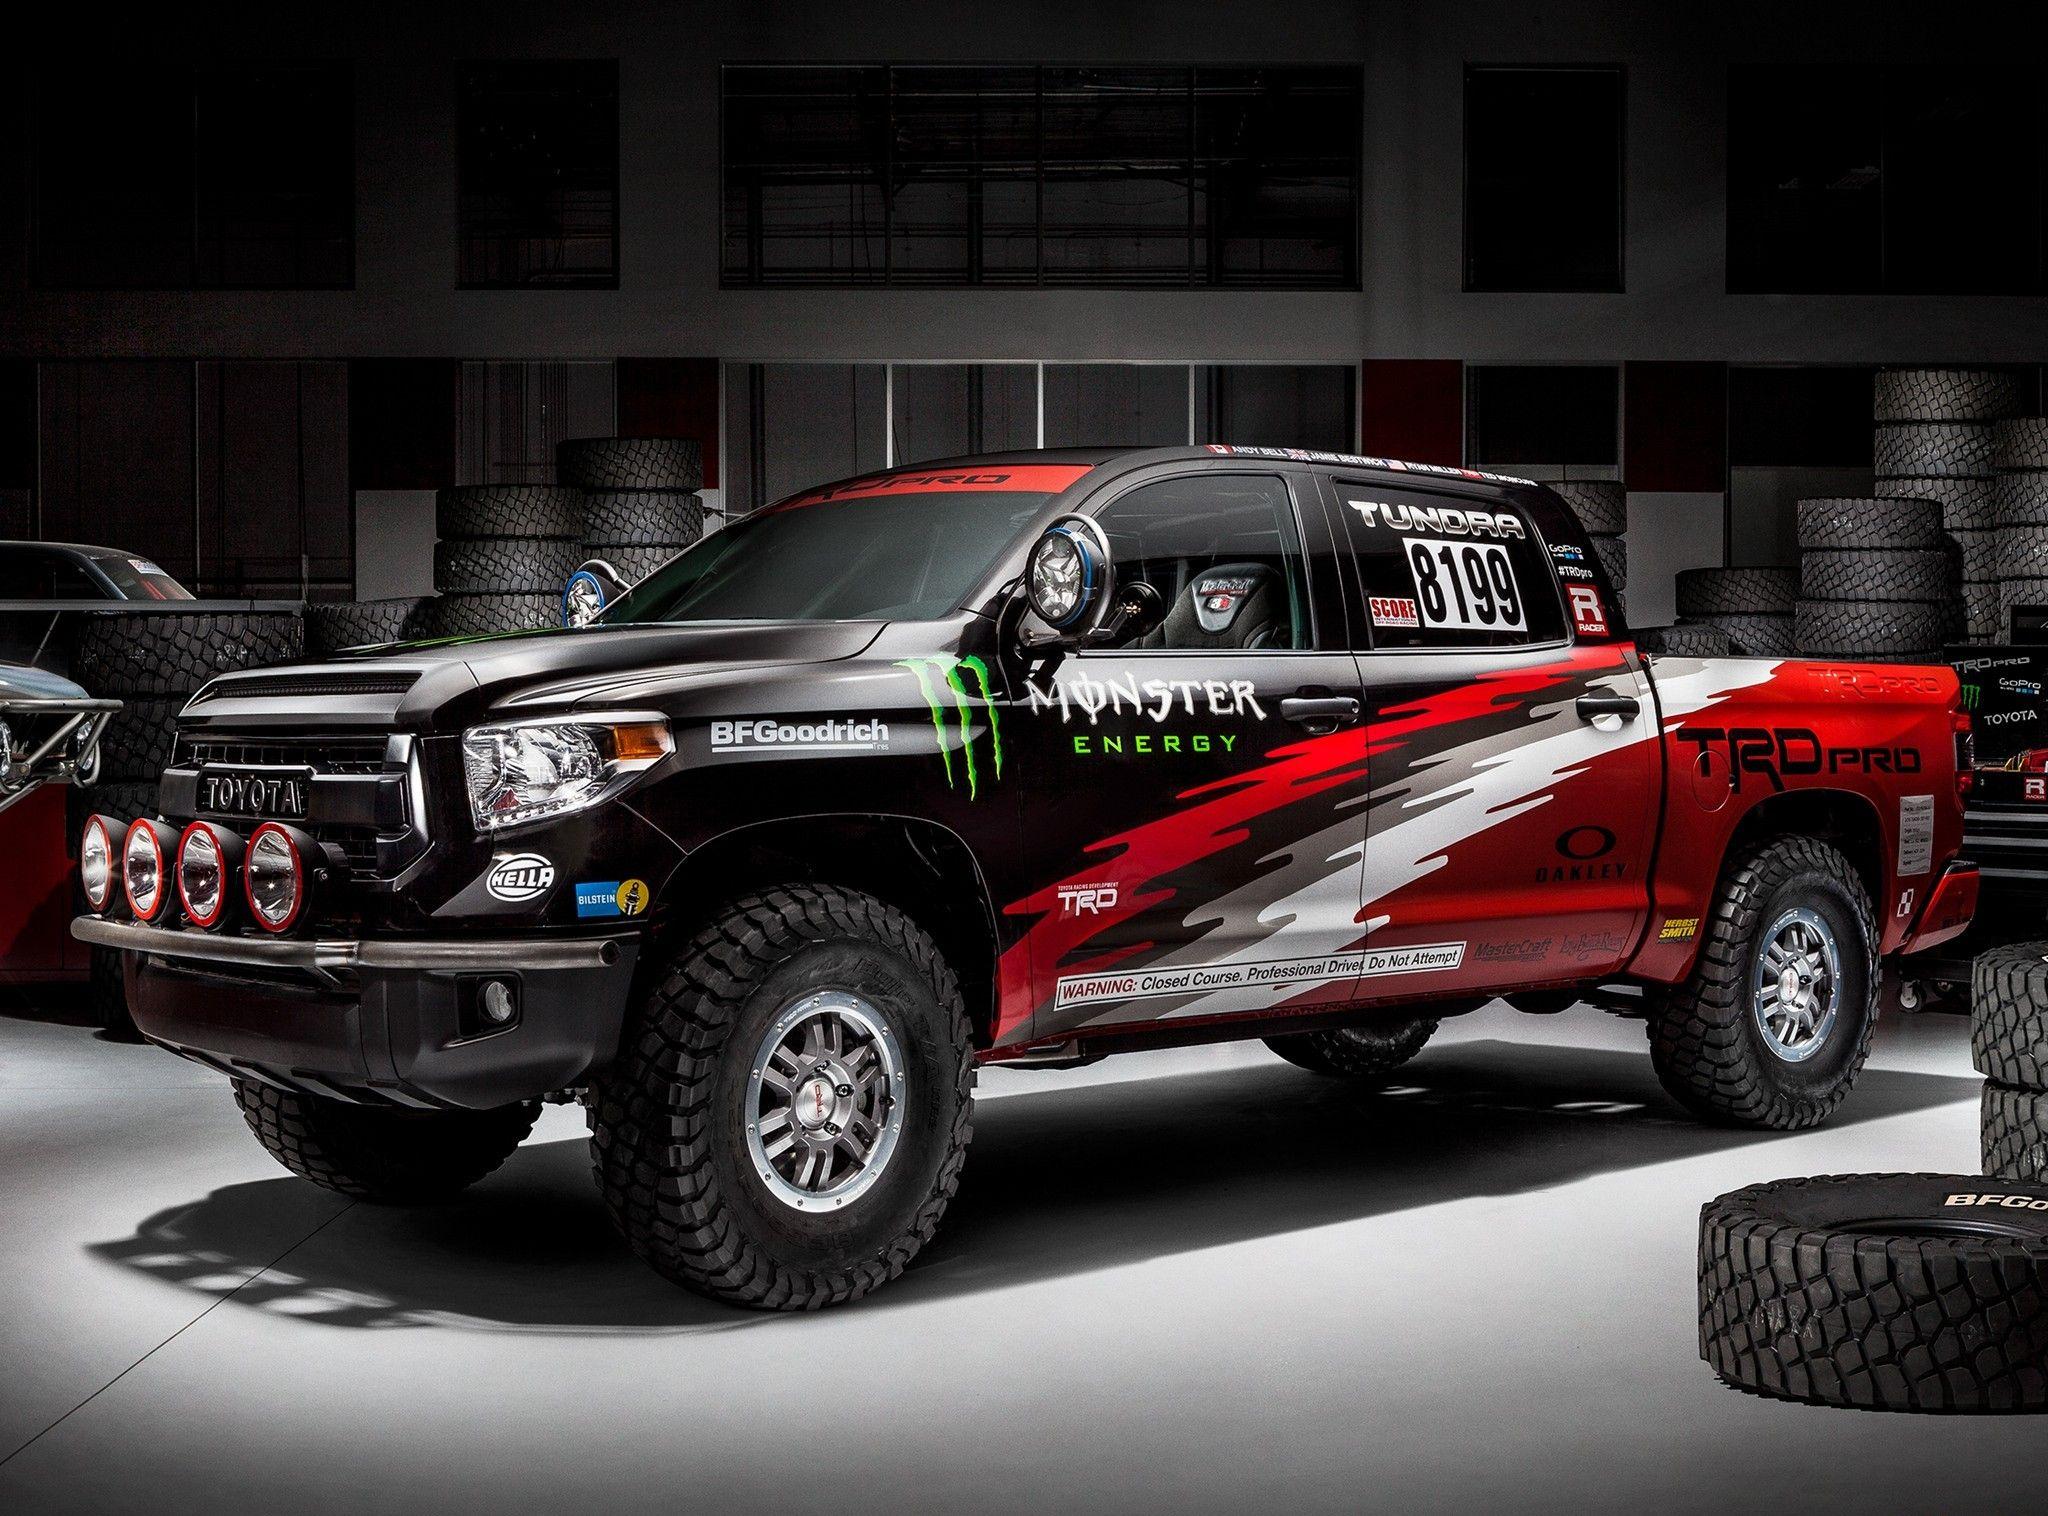 Toyota Tundra Wallpapers - Wallpaper Cave